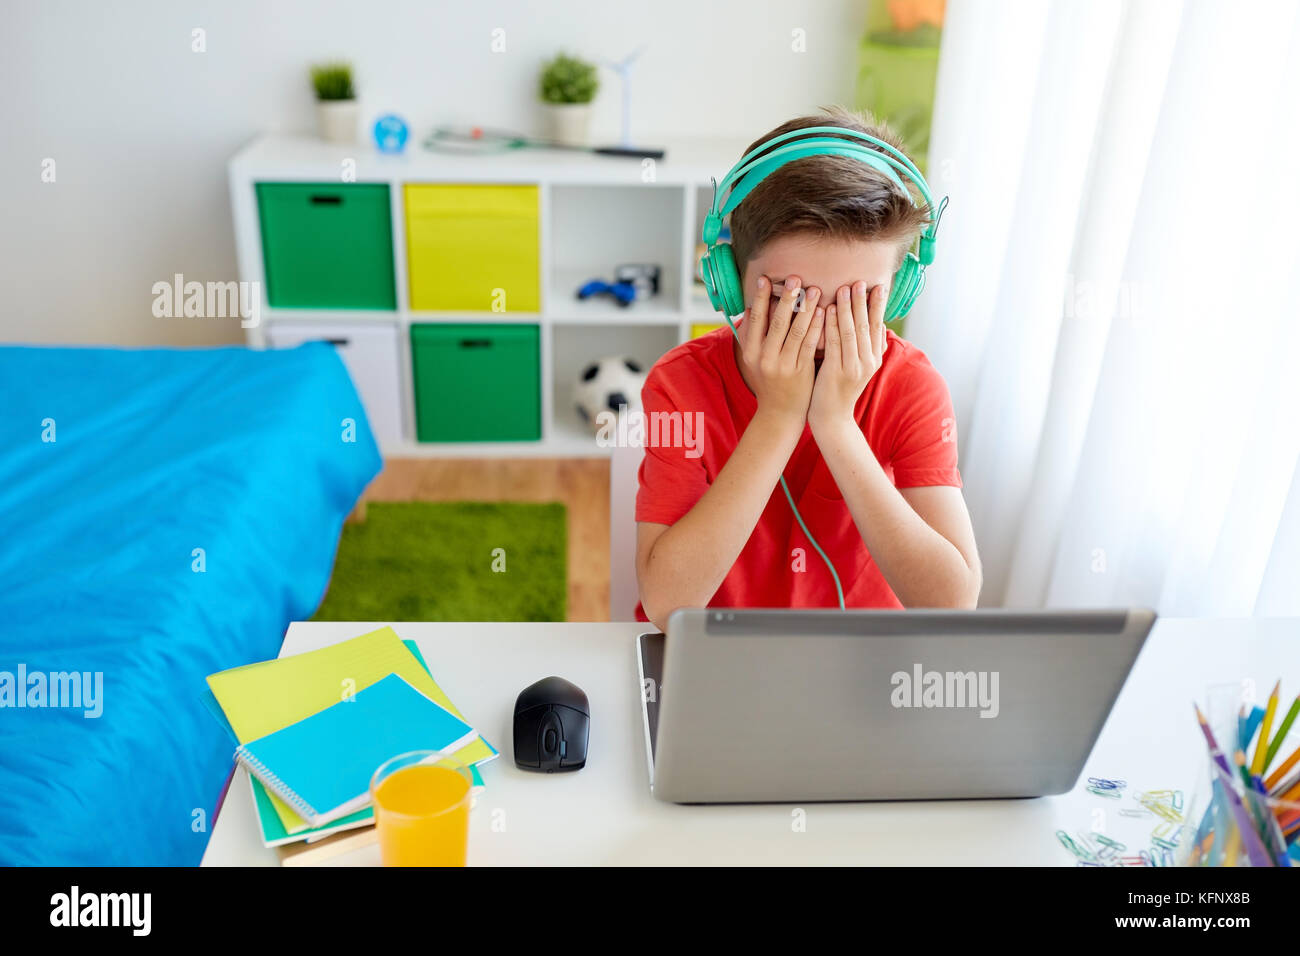 boy in headphones playing video game on laptop Stock Photo